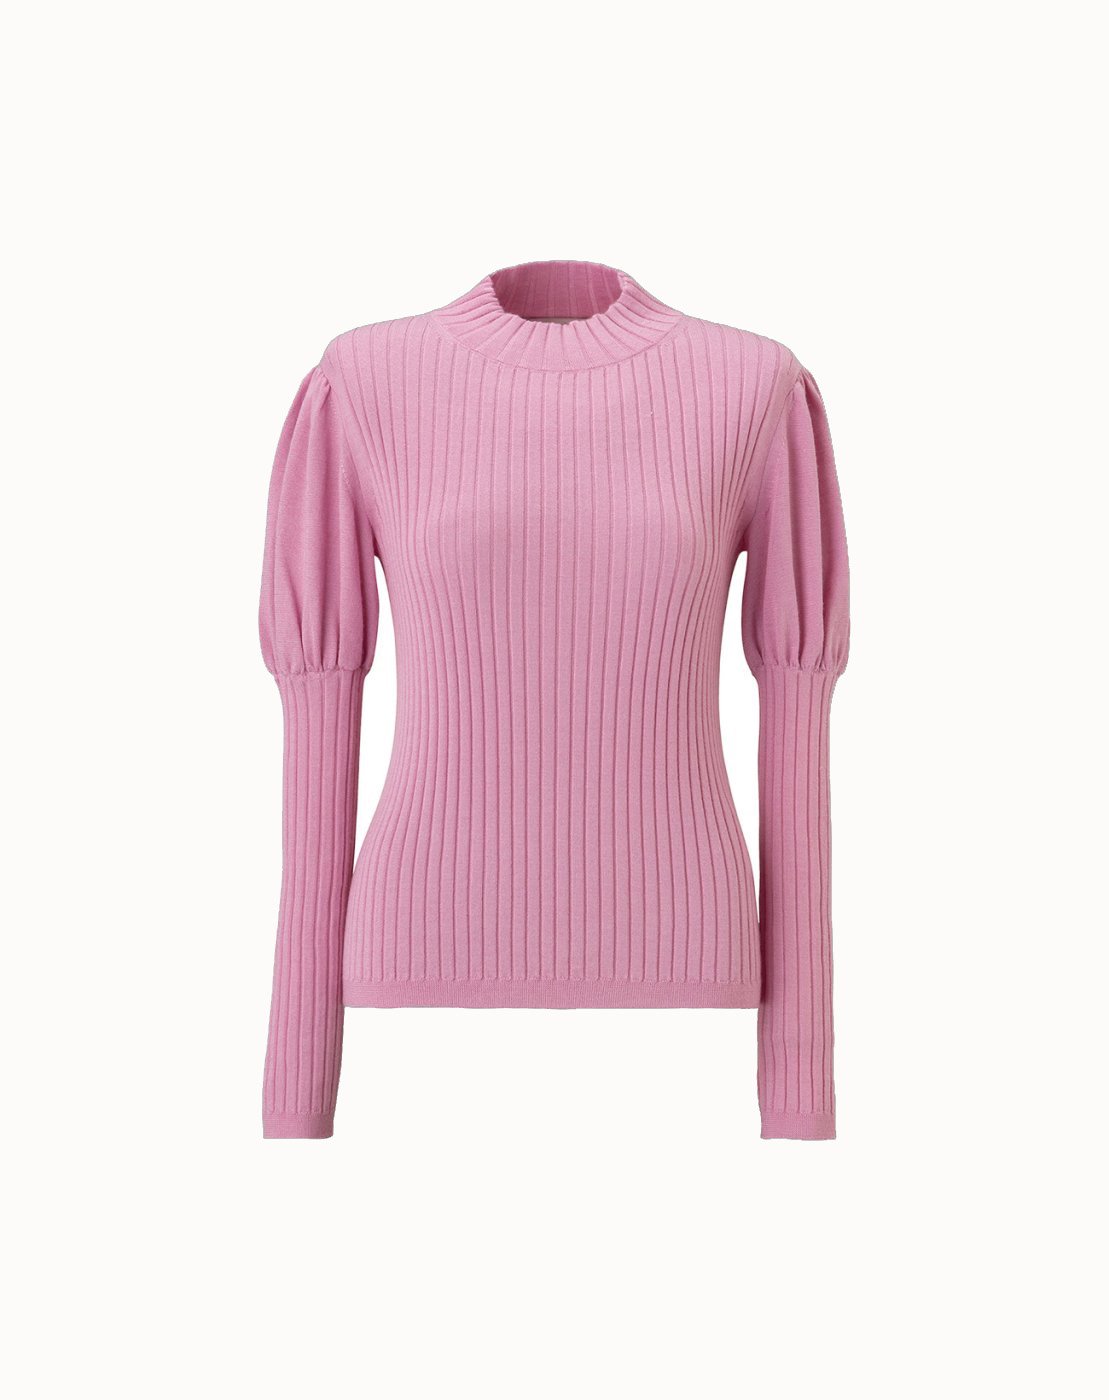 leur logette - <img class='new_mark_img1' src='https://img.shop-pro.jp/img/new/icons1.gif' style='border:none;display:inline;margin:0px;padding:0px;width:auto;' />Cashmere Silk Rib Top - Pink